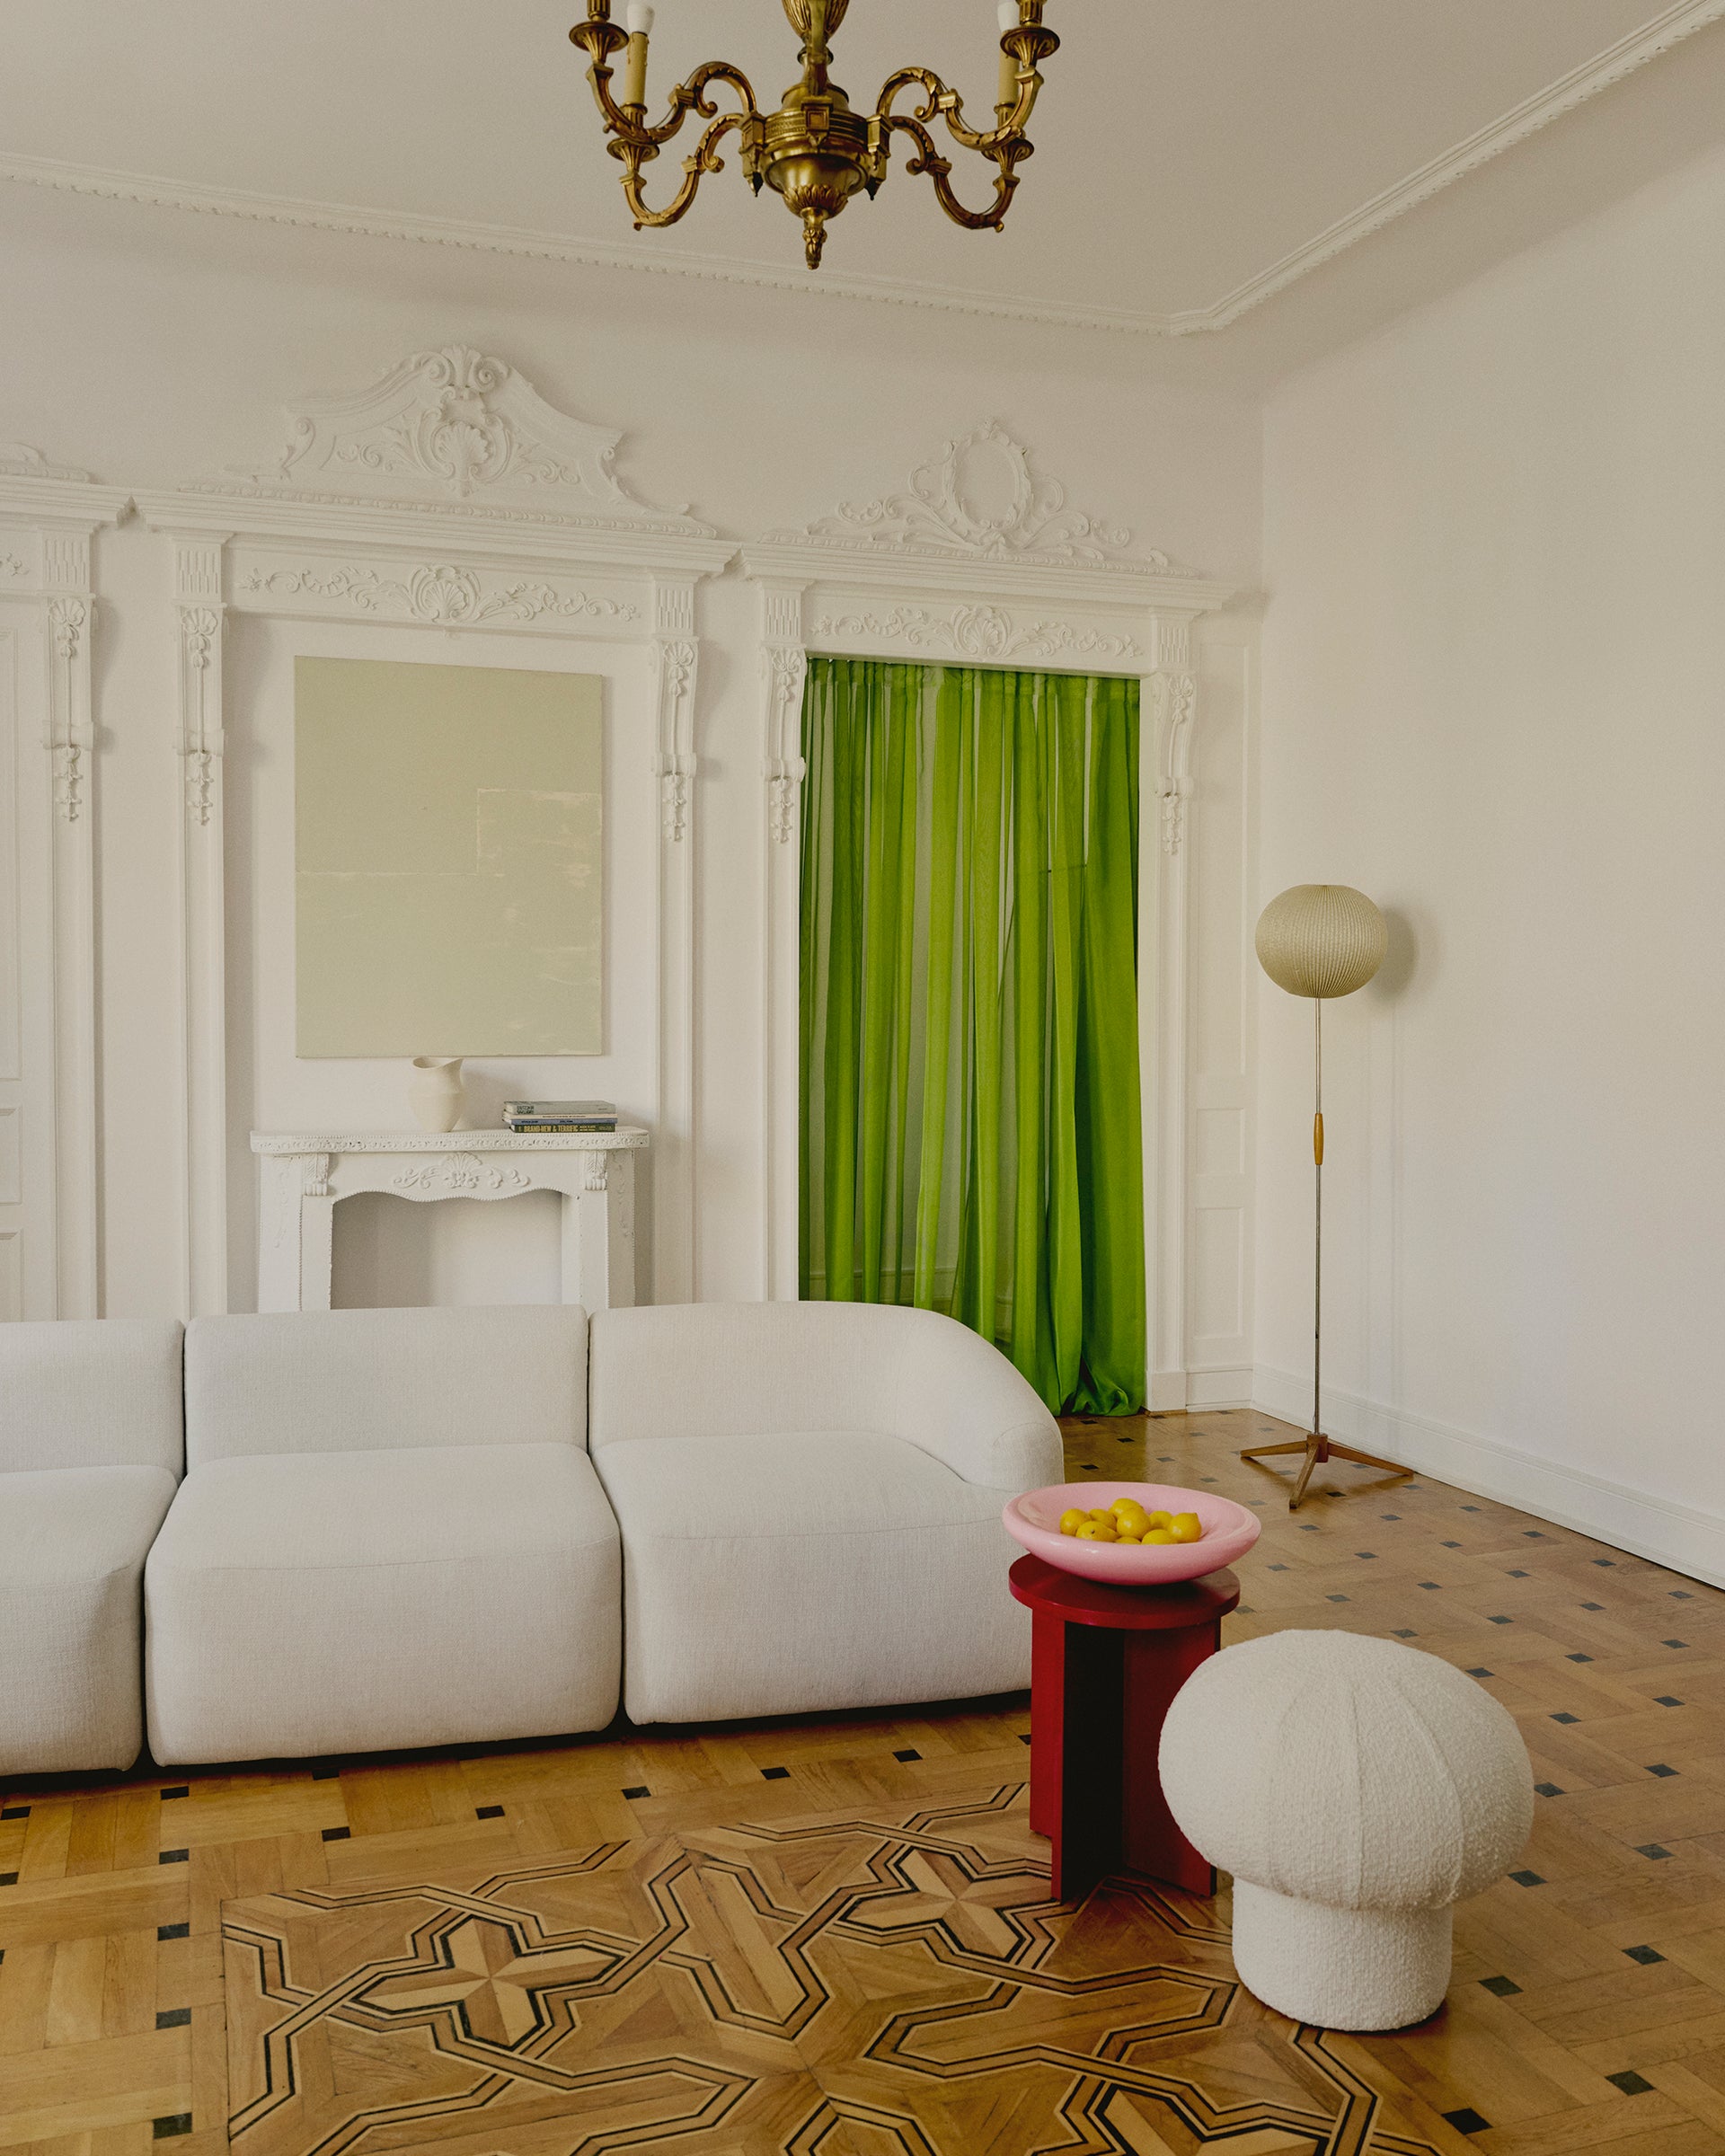 Green light curtain in classical interior with wooden floor